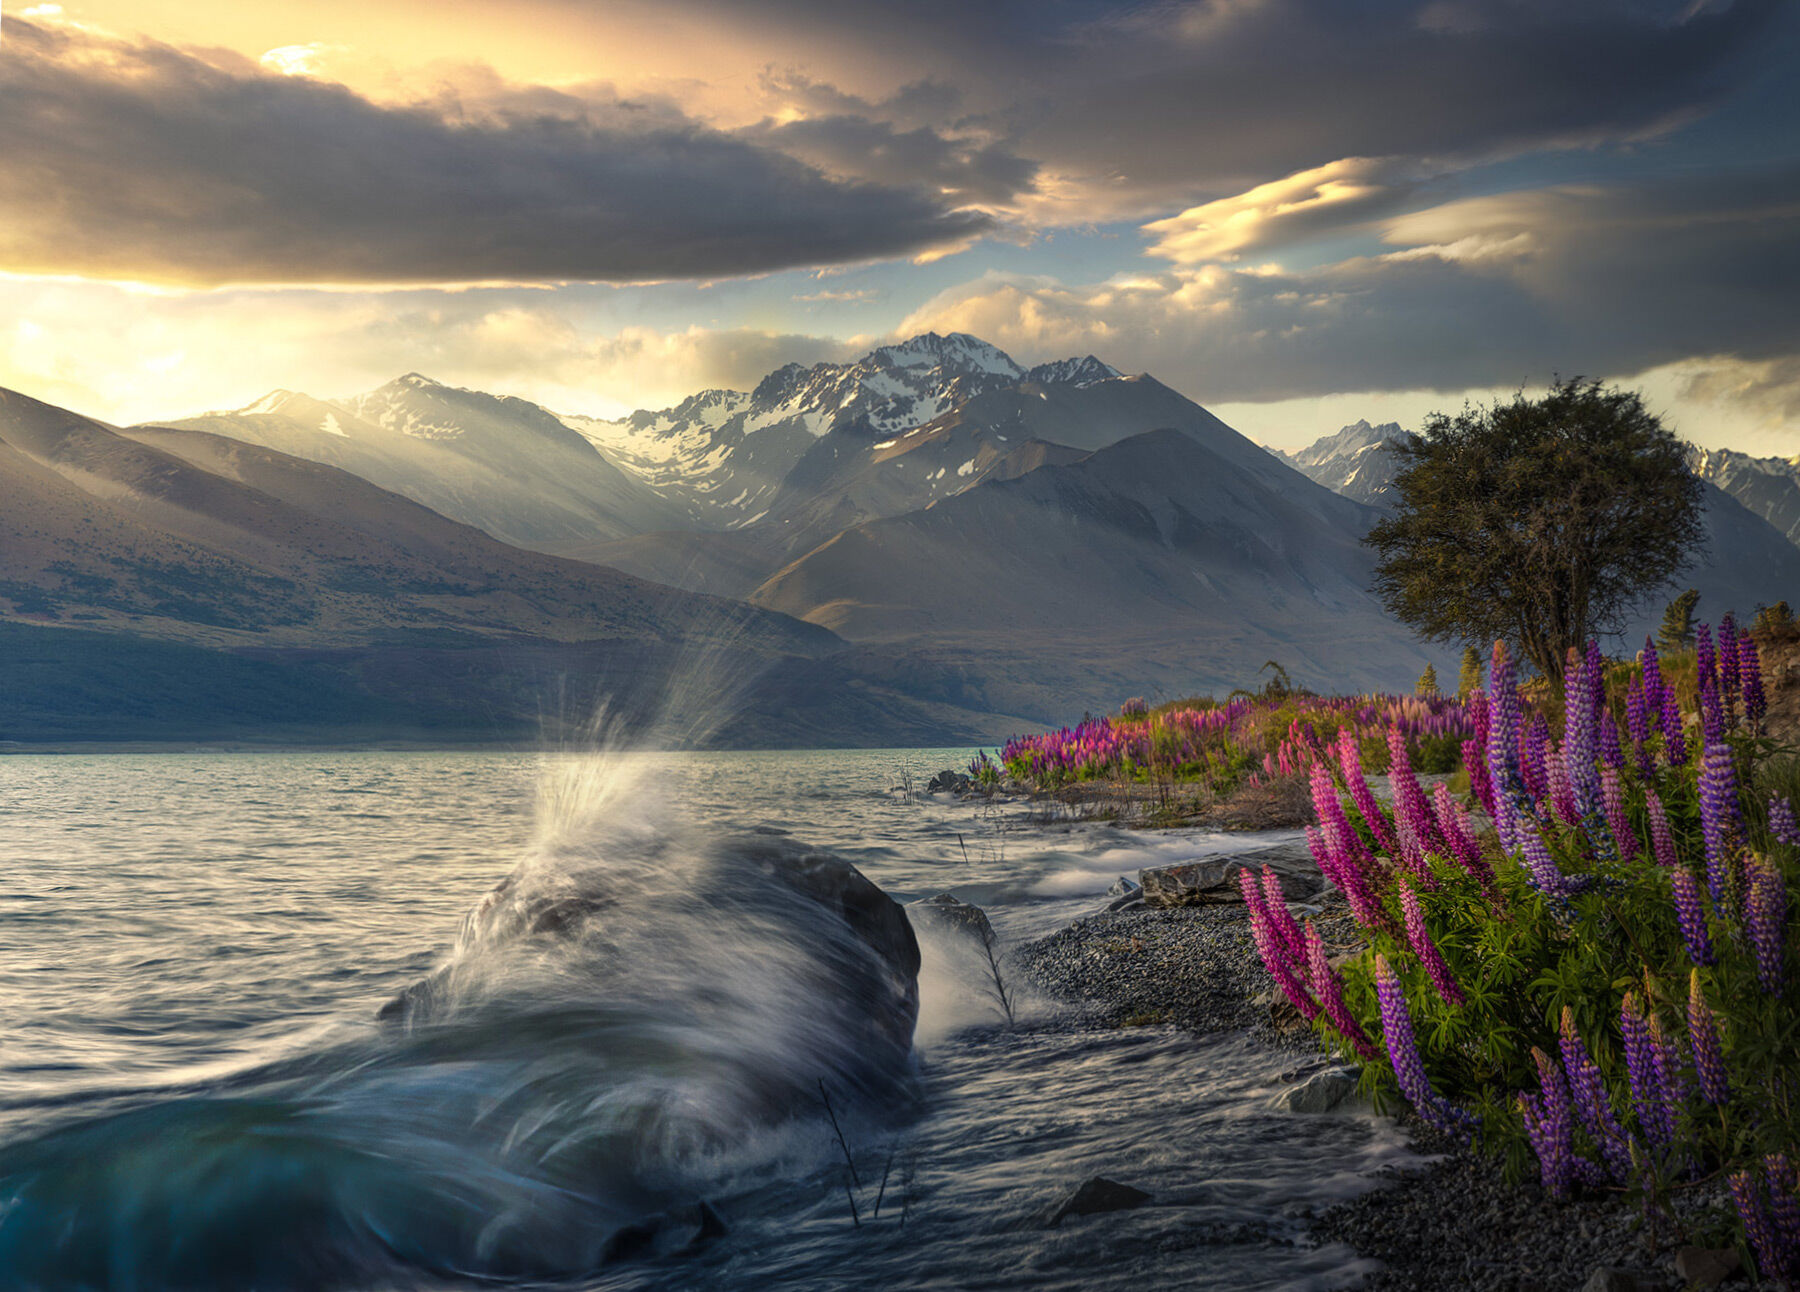 Waves crash during sunset light from the wildflower laden shores of Lake Pukaki in New Zealand